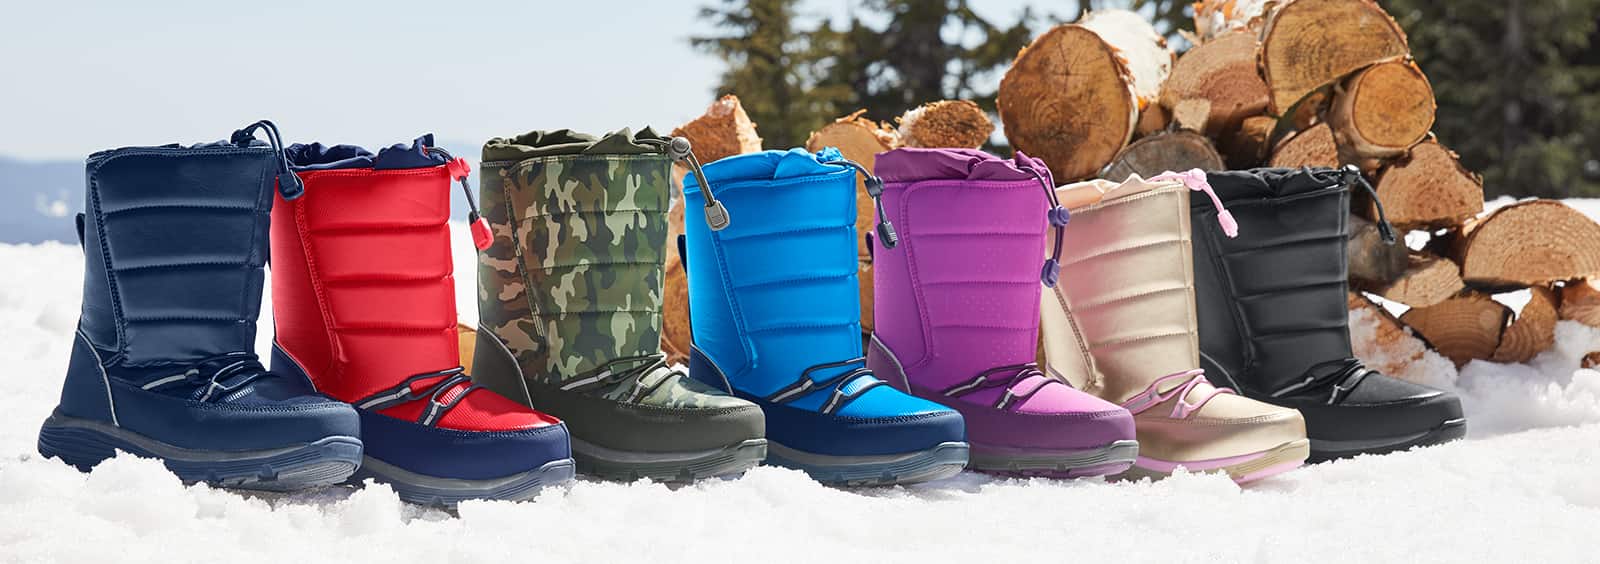 Winter Boots for Kids to Keep Them Warm and Happy